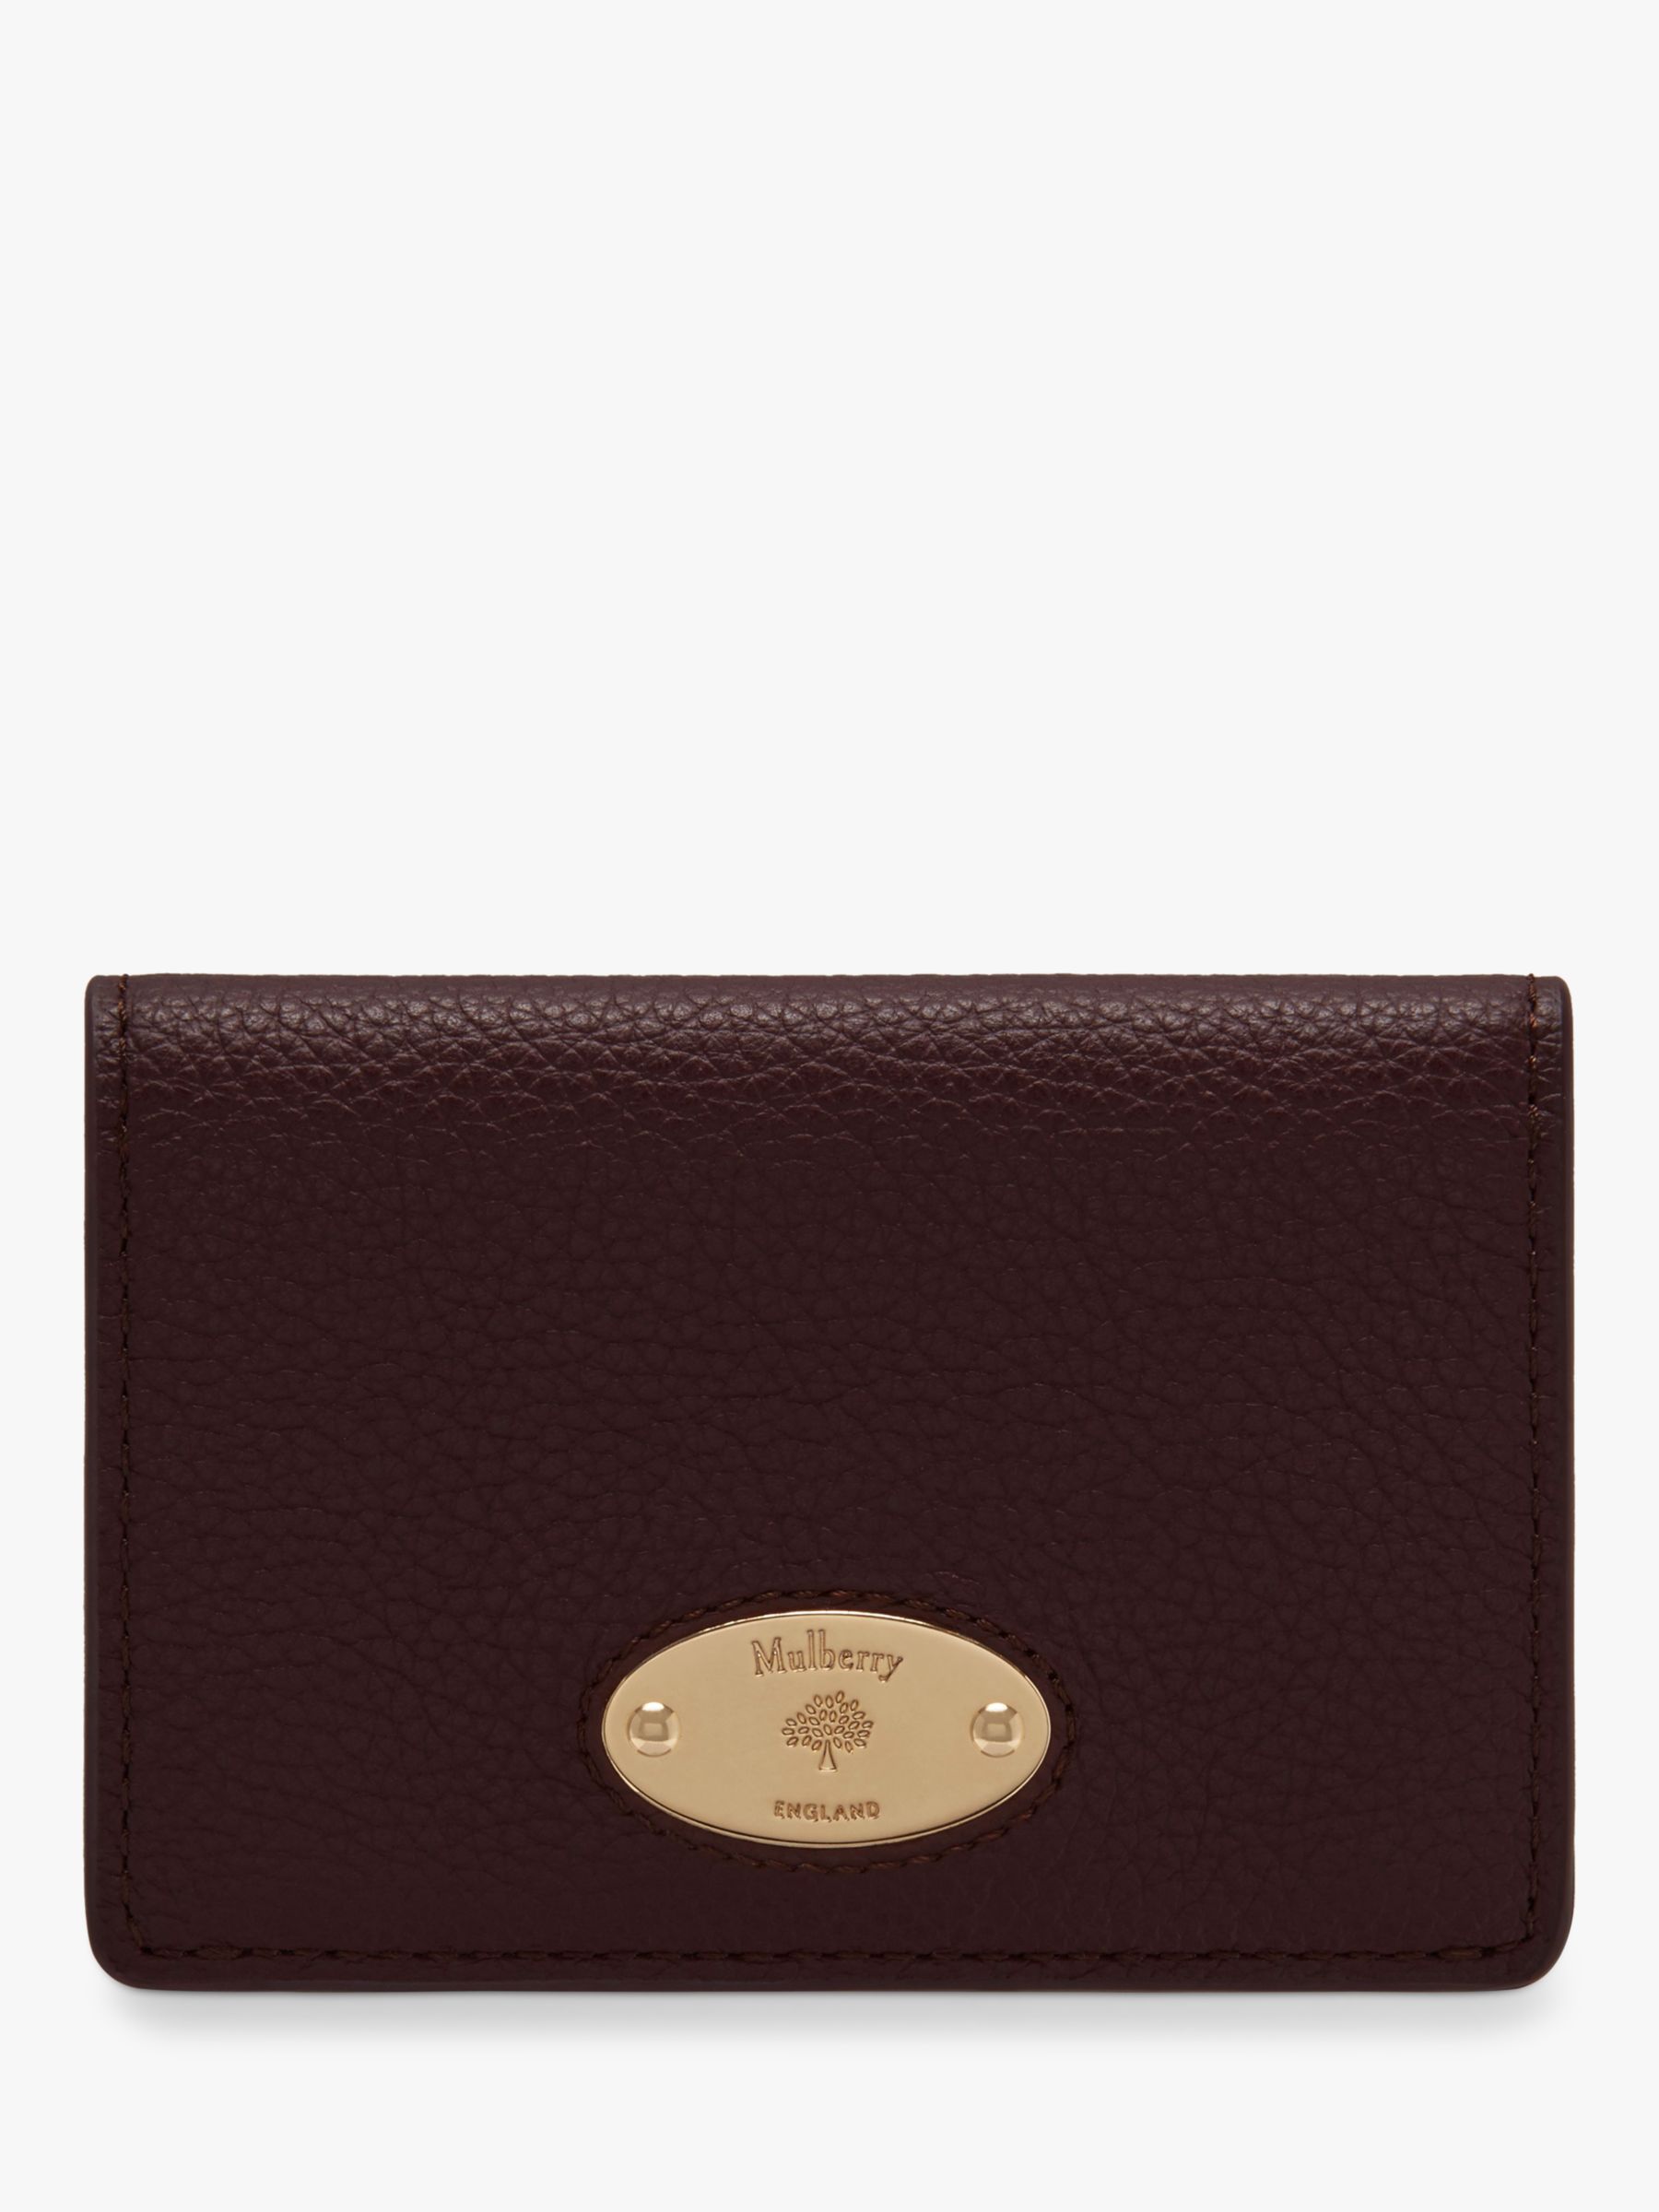 Mulberry Plaque Small Classic Grain Leather Card Holder, Oxblood at ...